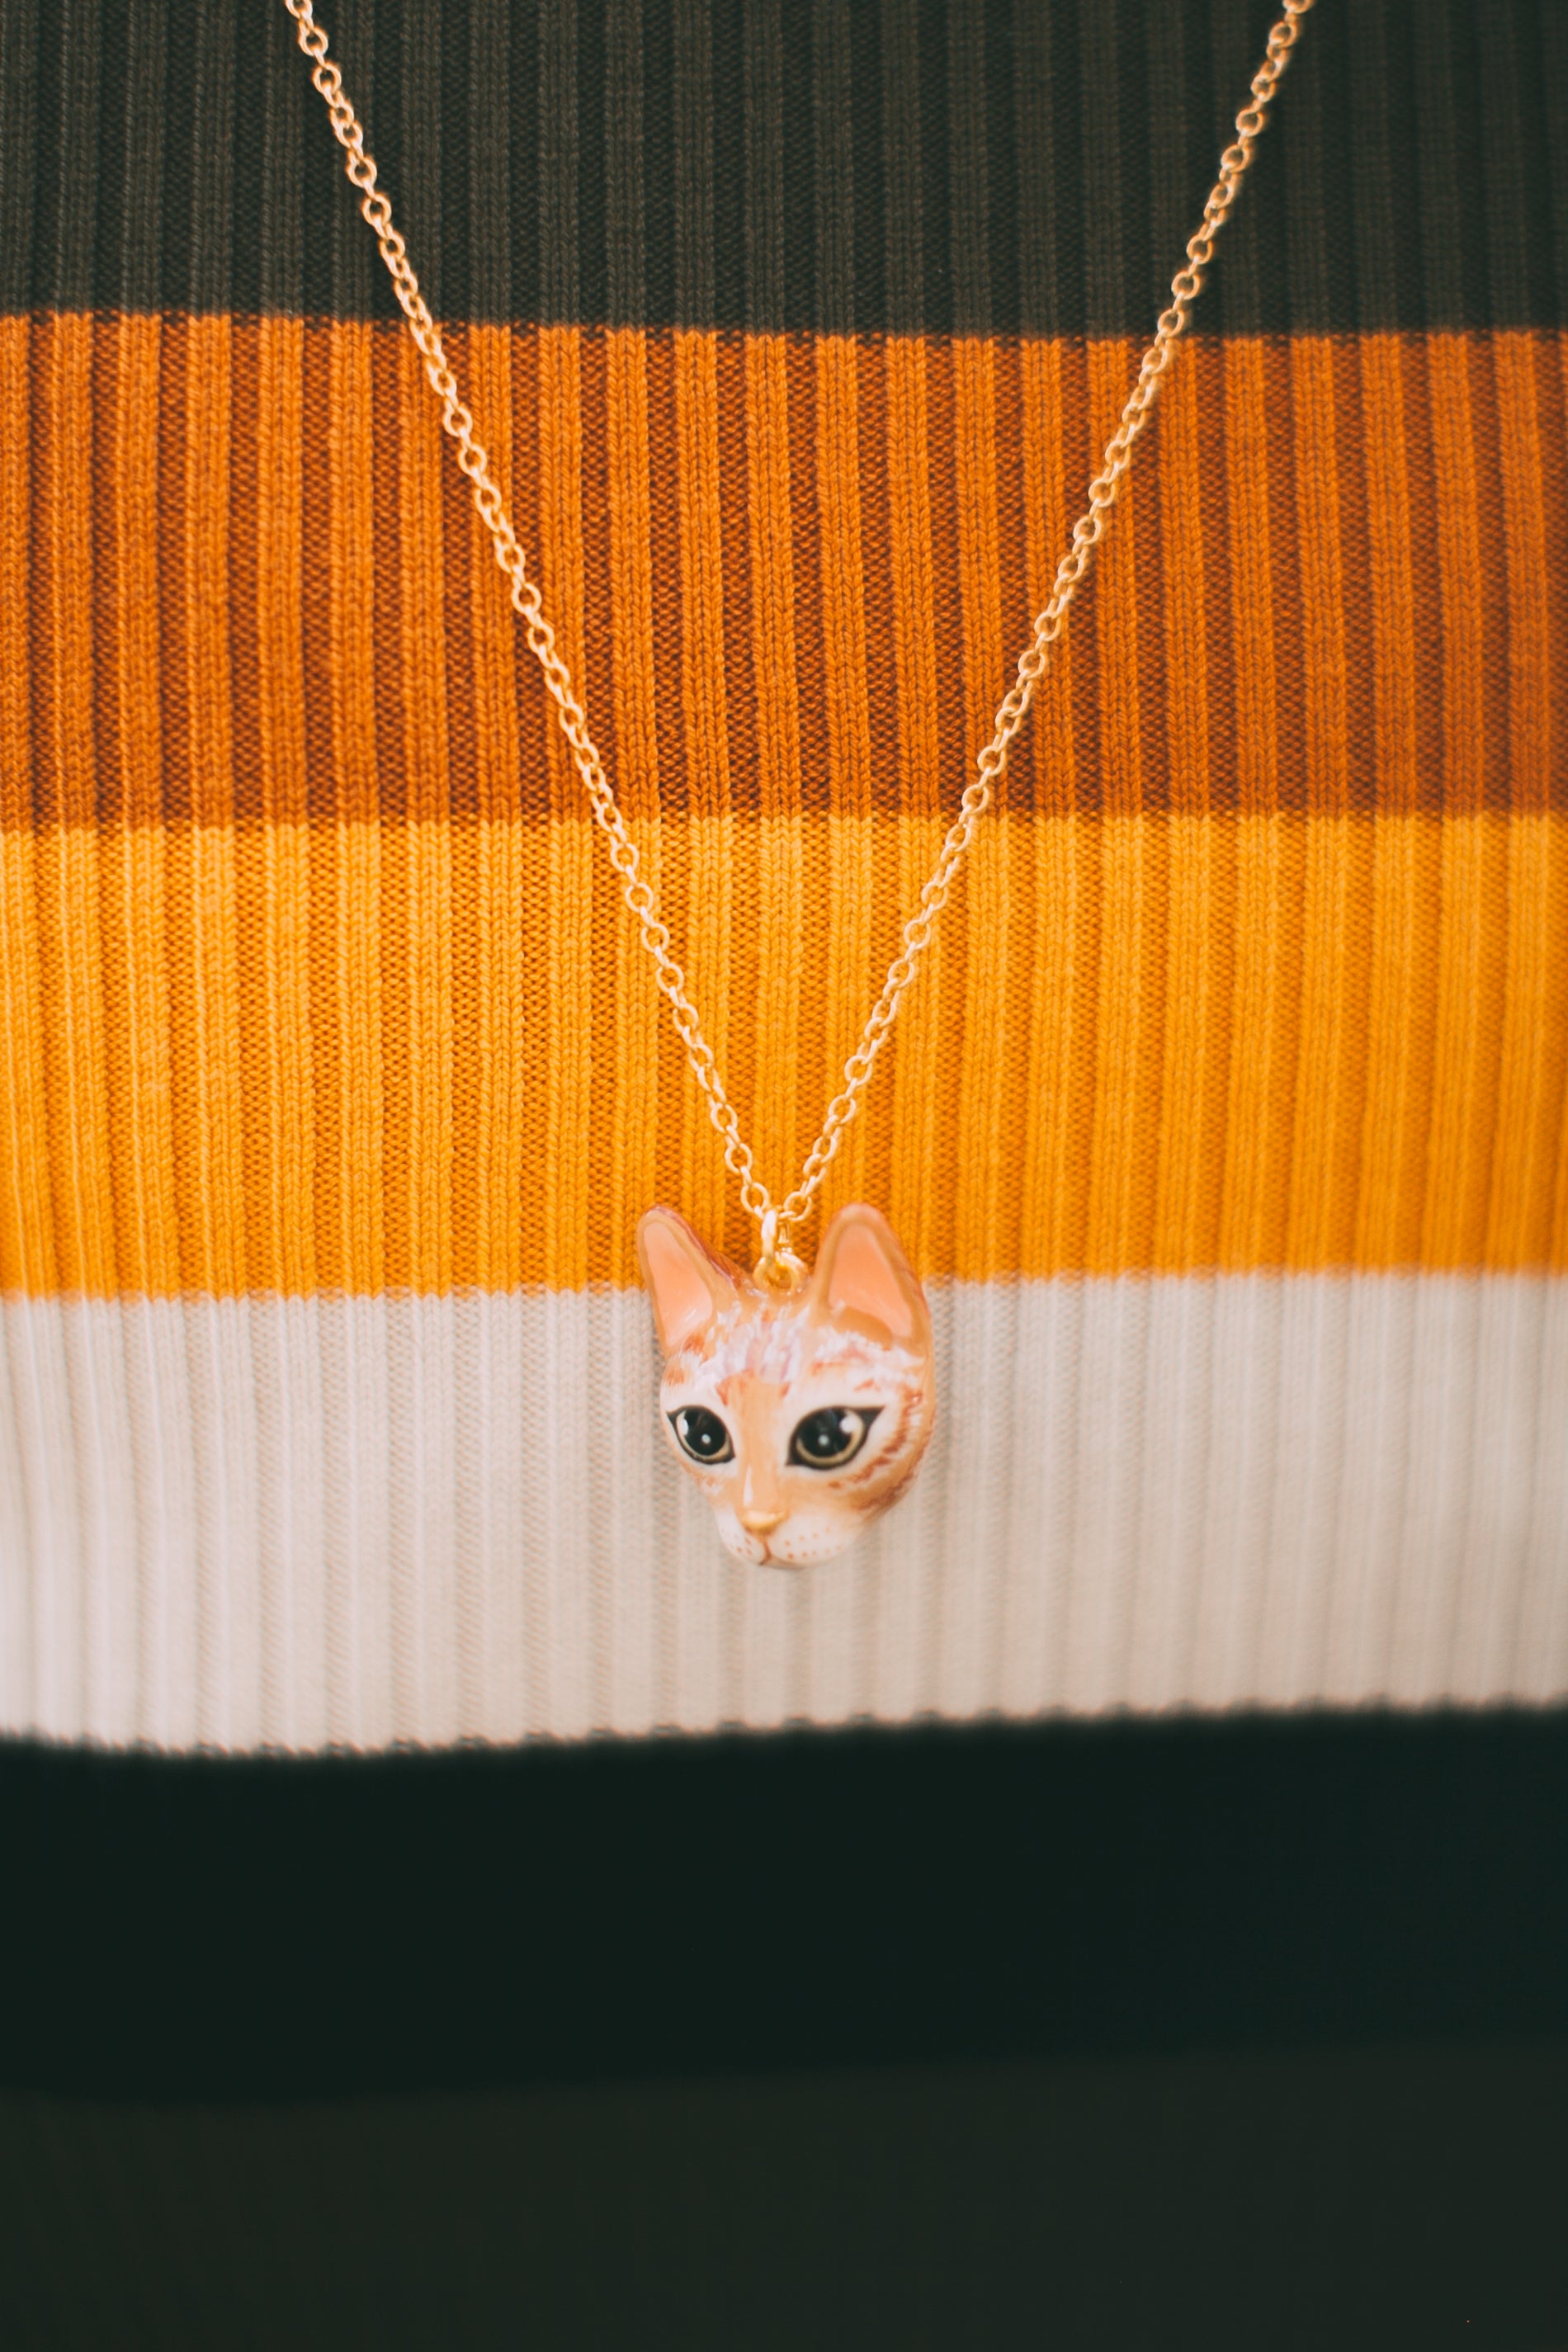 Stainless Steel Necklaces Cute Long Tail Cat Pendant Choker Clavicle Chain  Charm Fashion Necklaces For Women Jewelry Girls Gifts